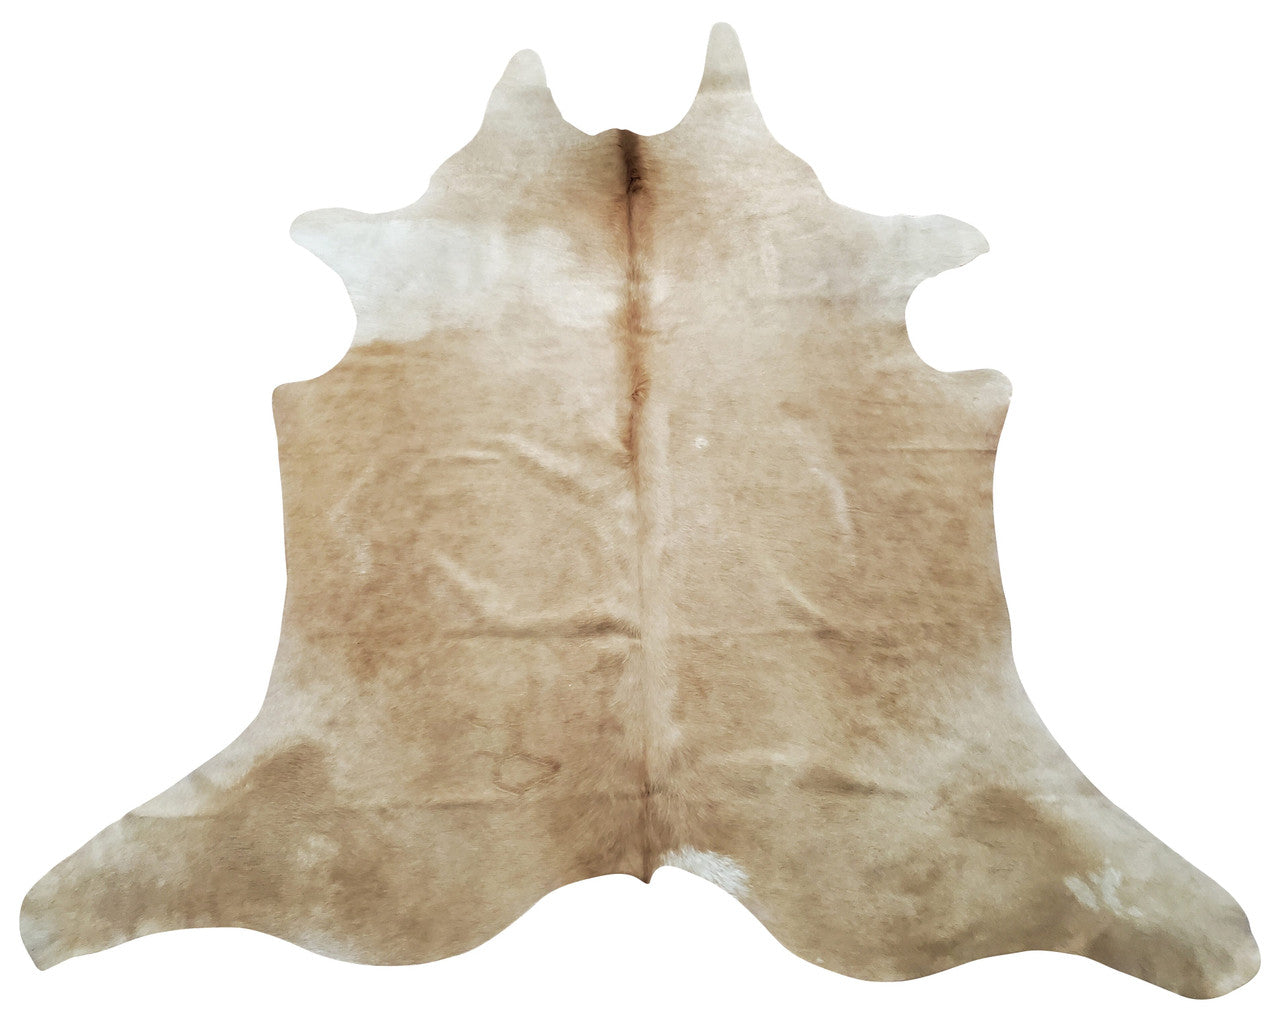 A Brazilian pure beige cowhide rug is what your want, it is short hair on hide and comfortable under the floor, high quality and perfect as centerpiece.